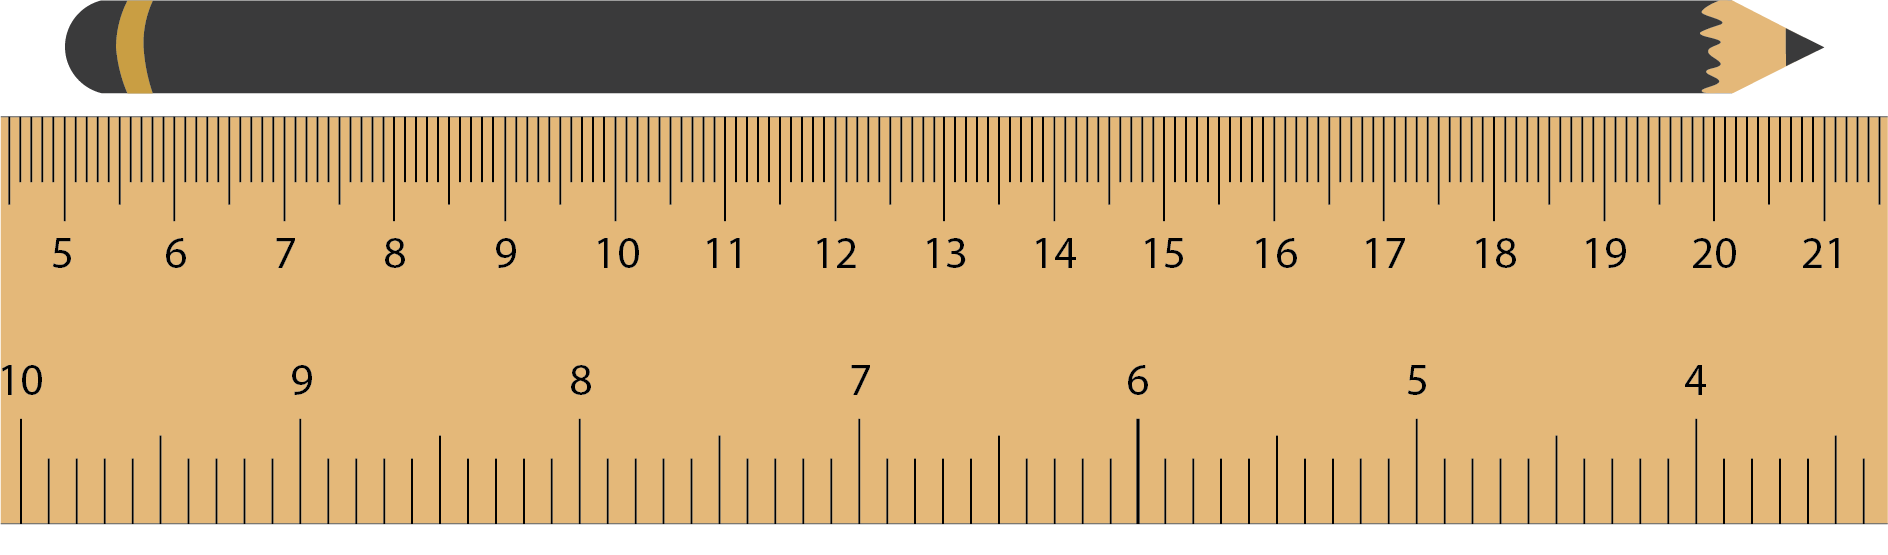 Image of a ruler being used to measure the length of a pencil. The beginning of the pencil is aligned with the 5 cm mark on the ruler.